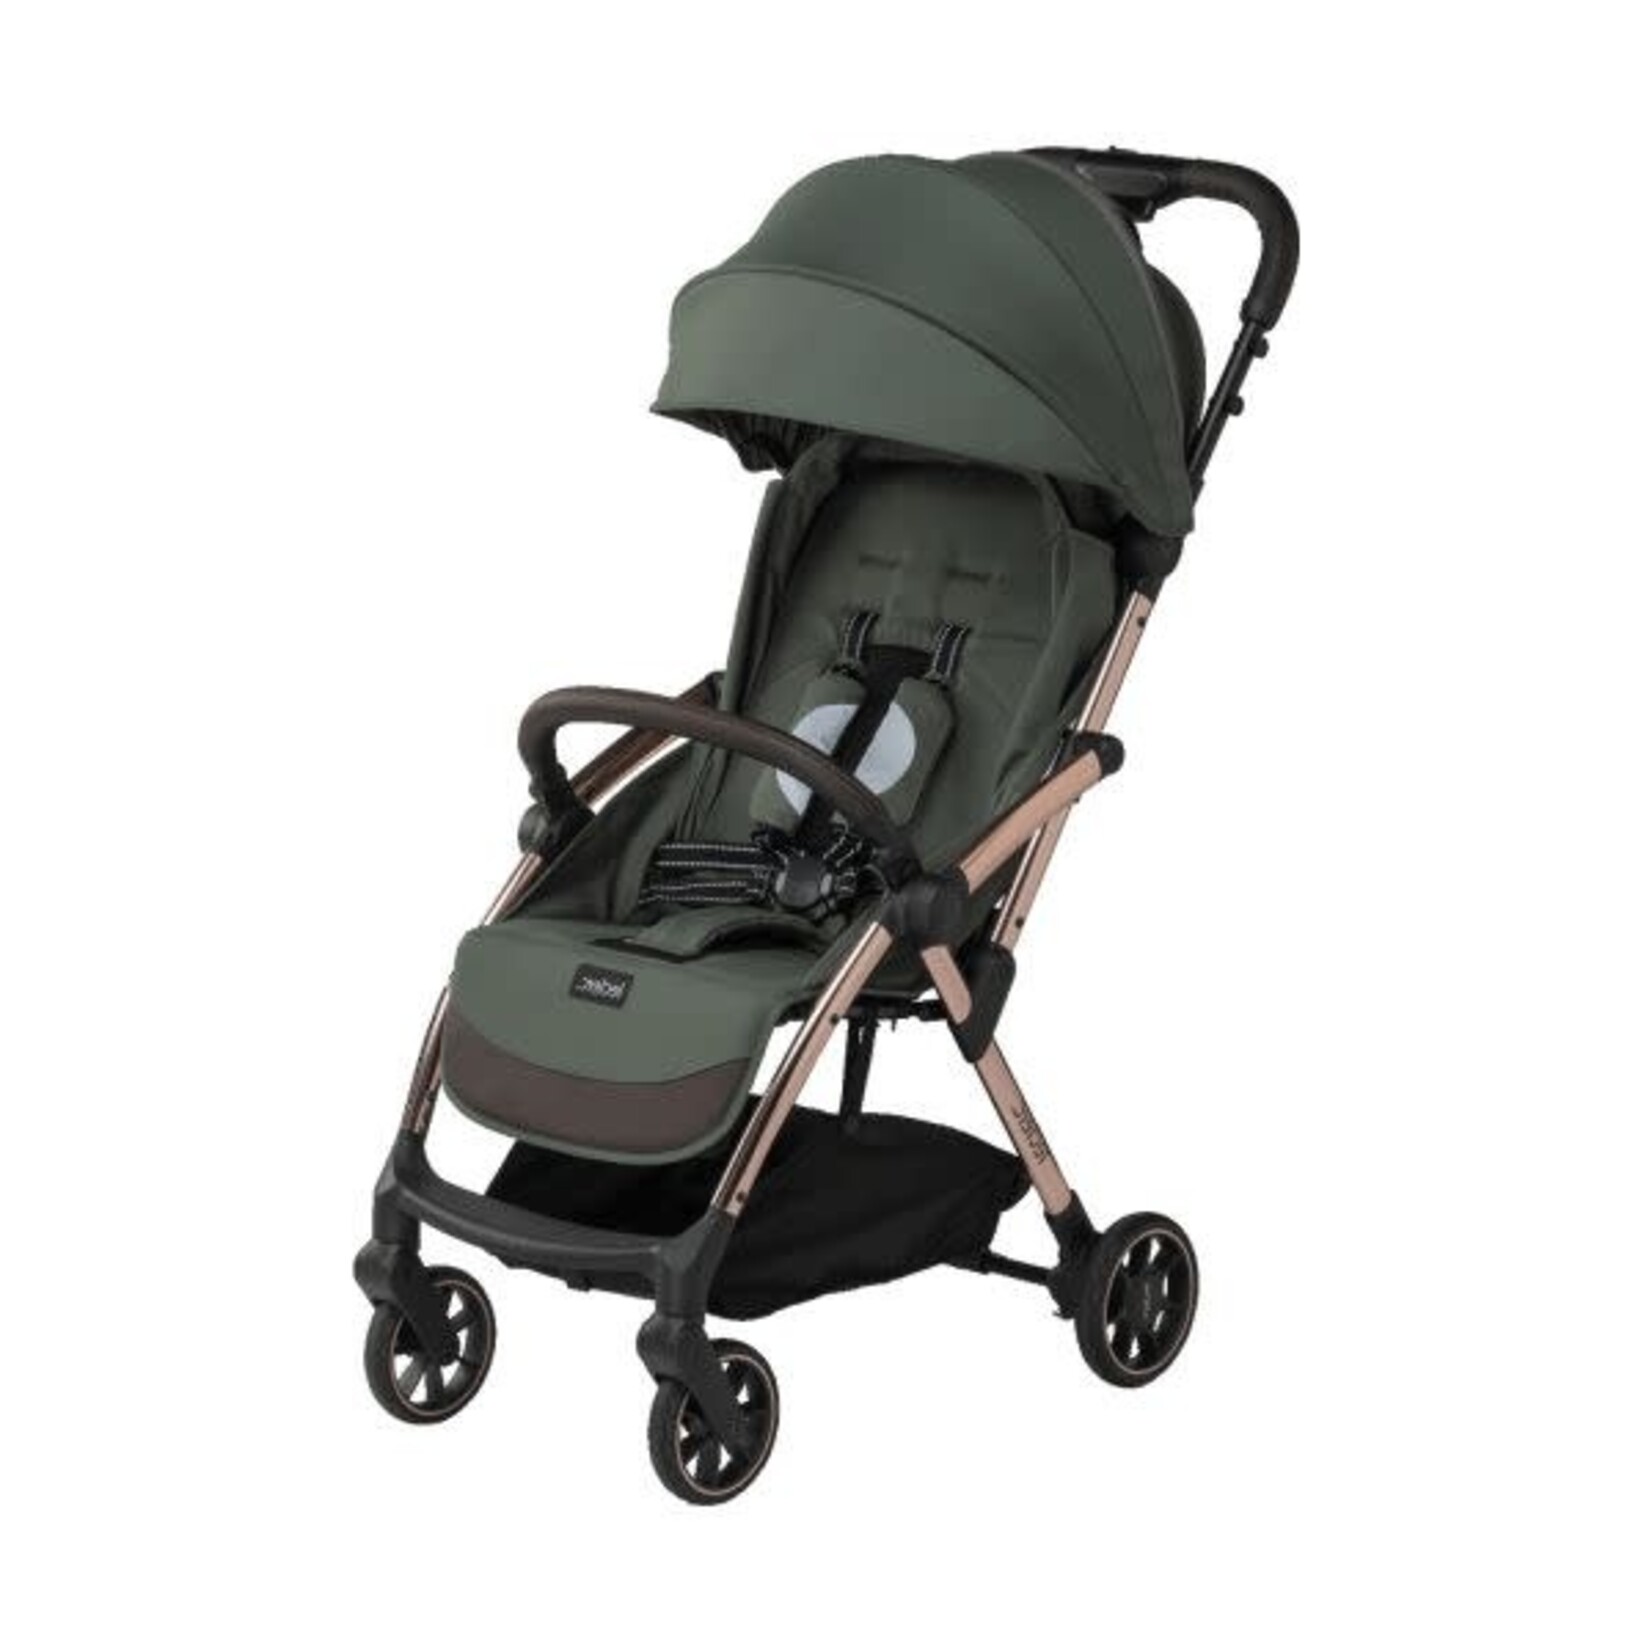 Leclerc Baby Leclerc Baby - Influencer Army Green met MAGIC FOLD systeem!